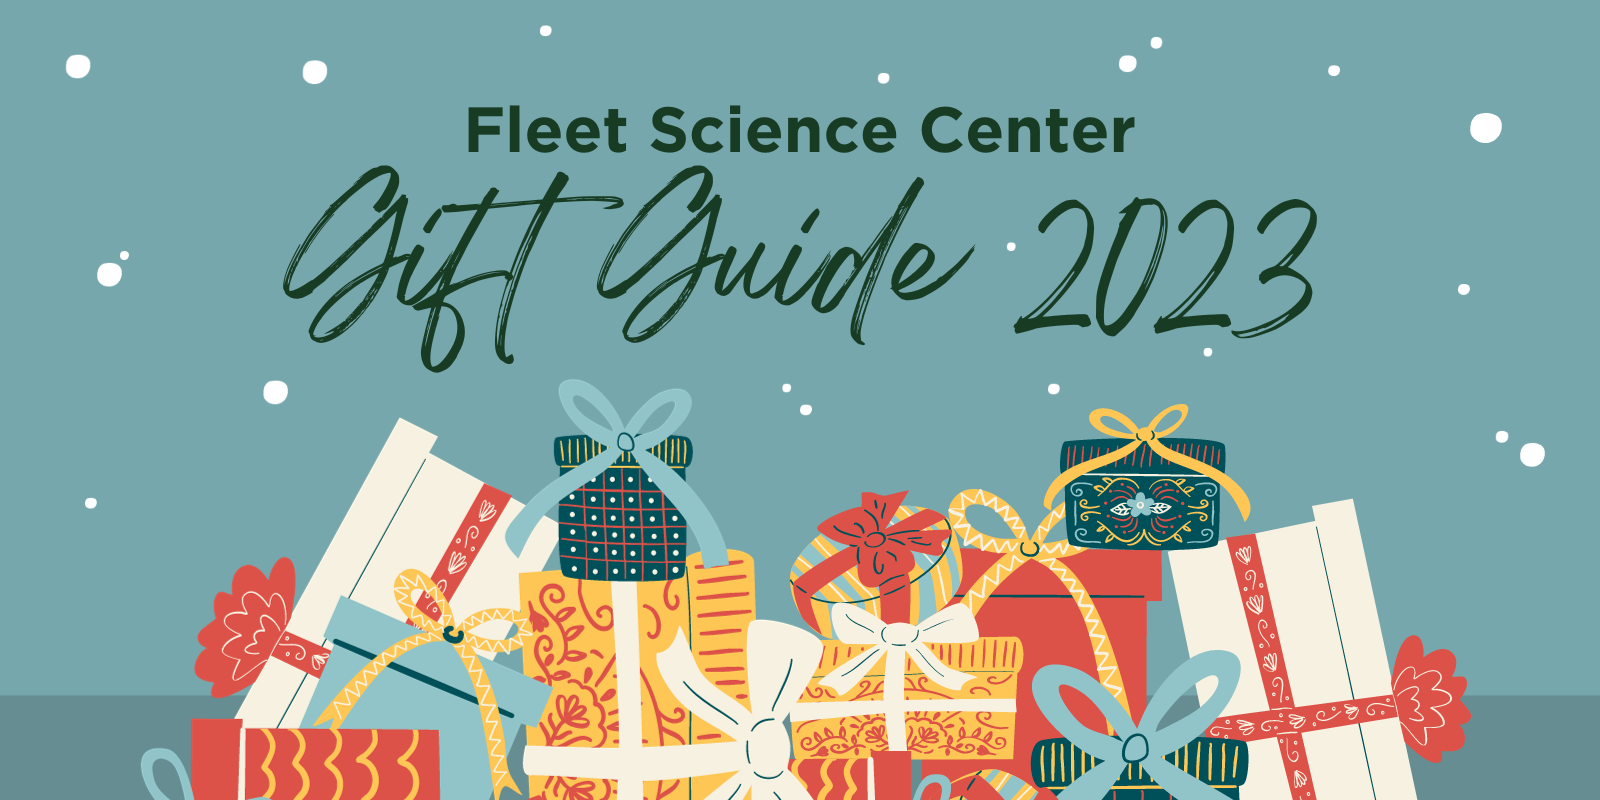 Fleet Science Center Gift Guide 2023 with wrapped present below the text